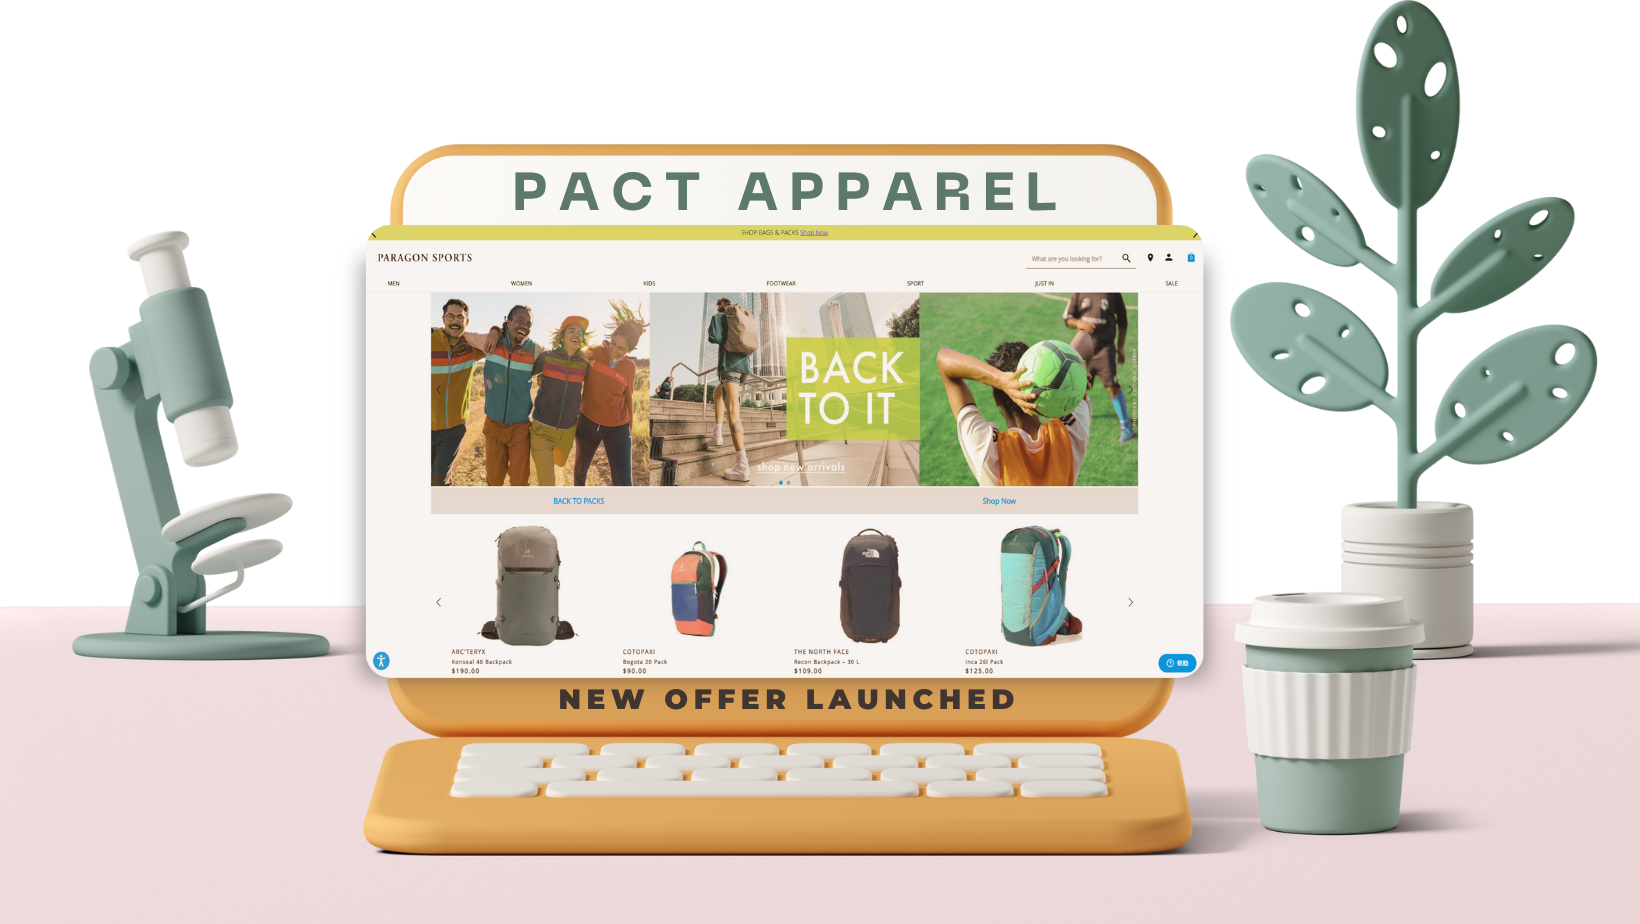 New offer launched: Pact Apparel Affiliate Program